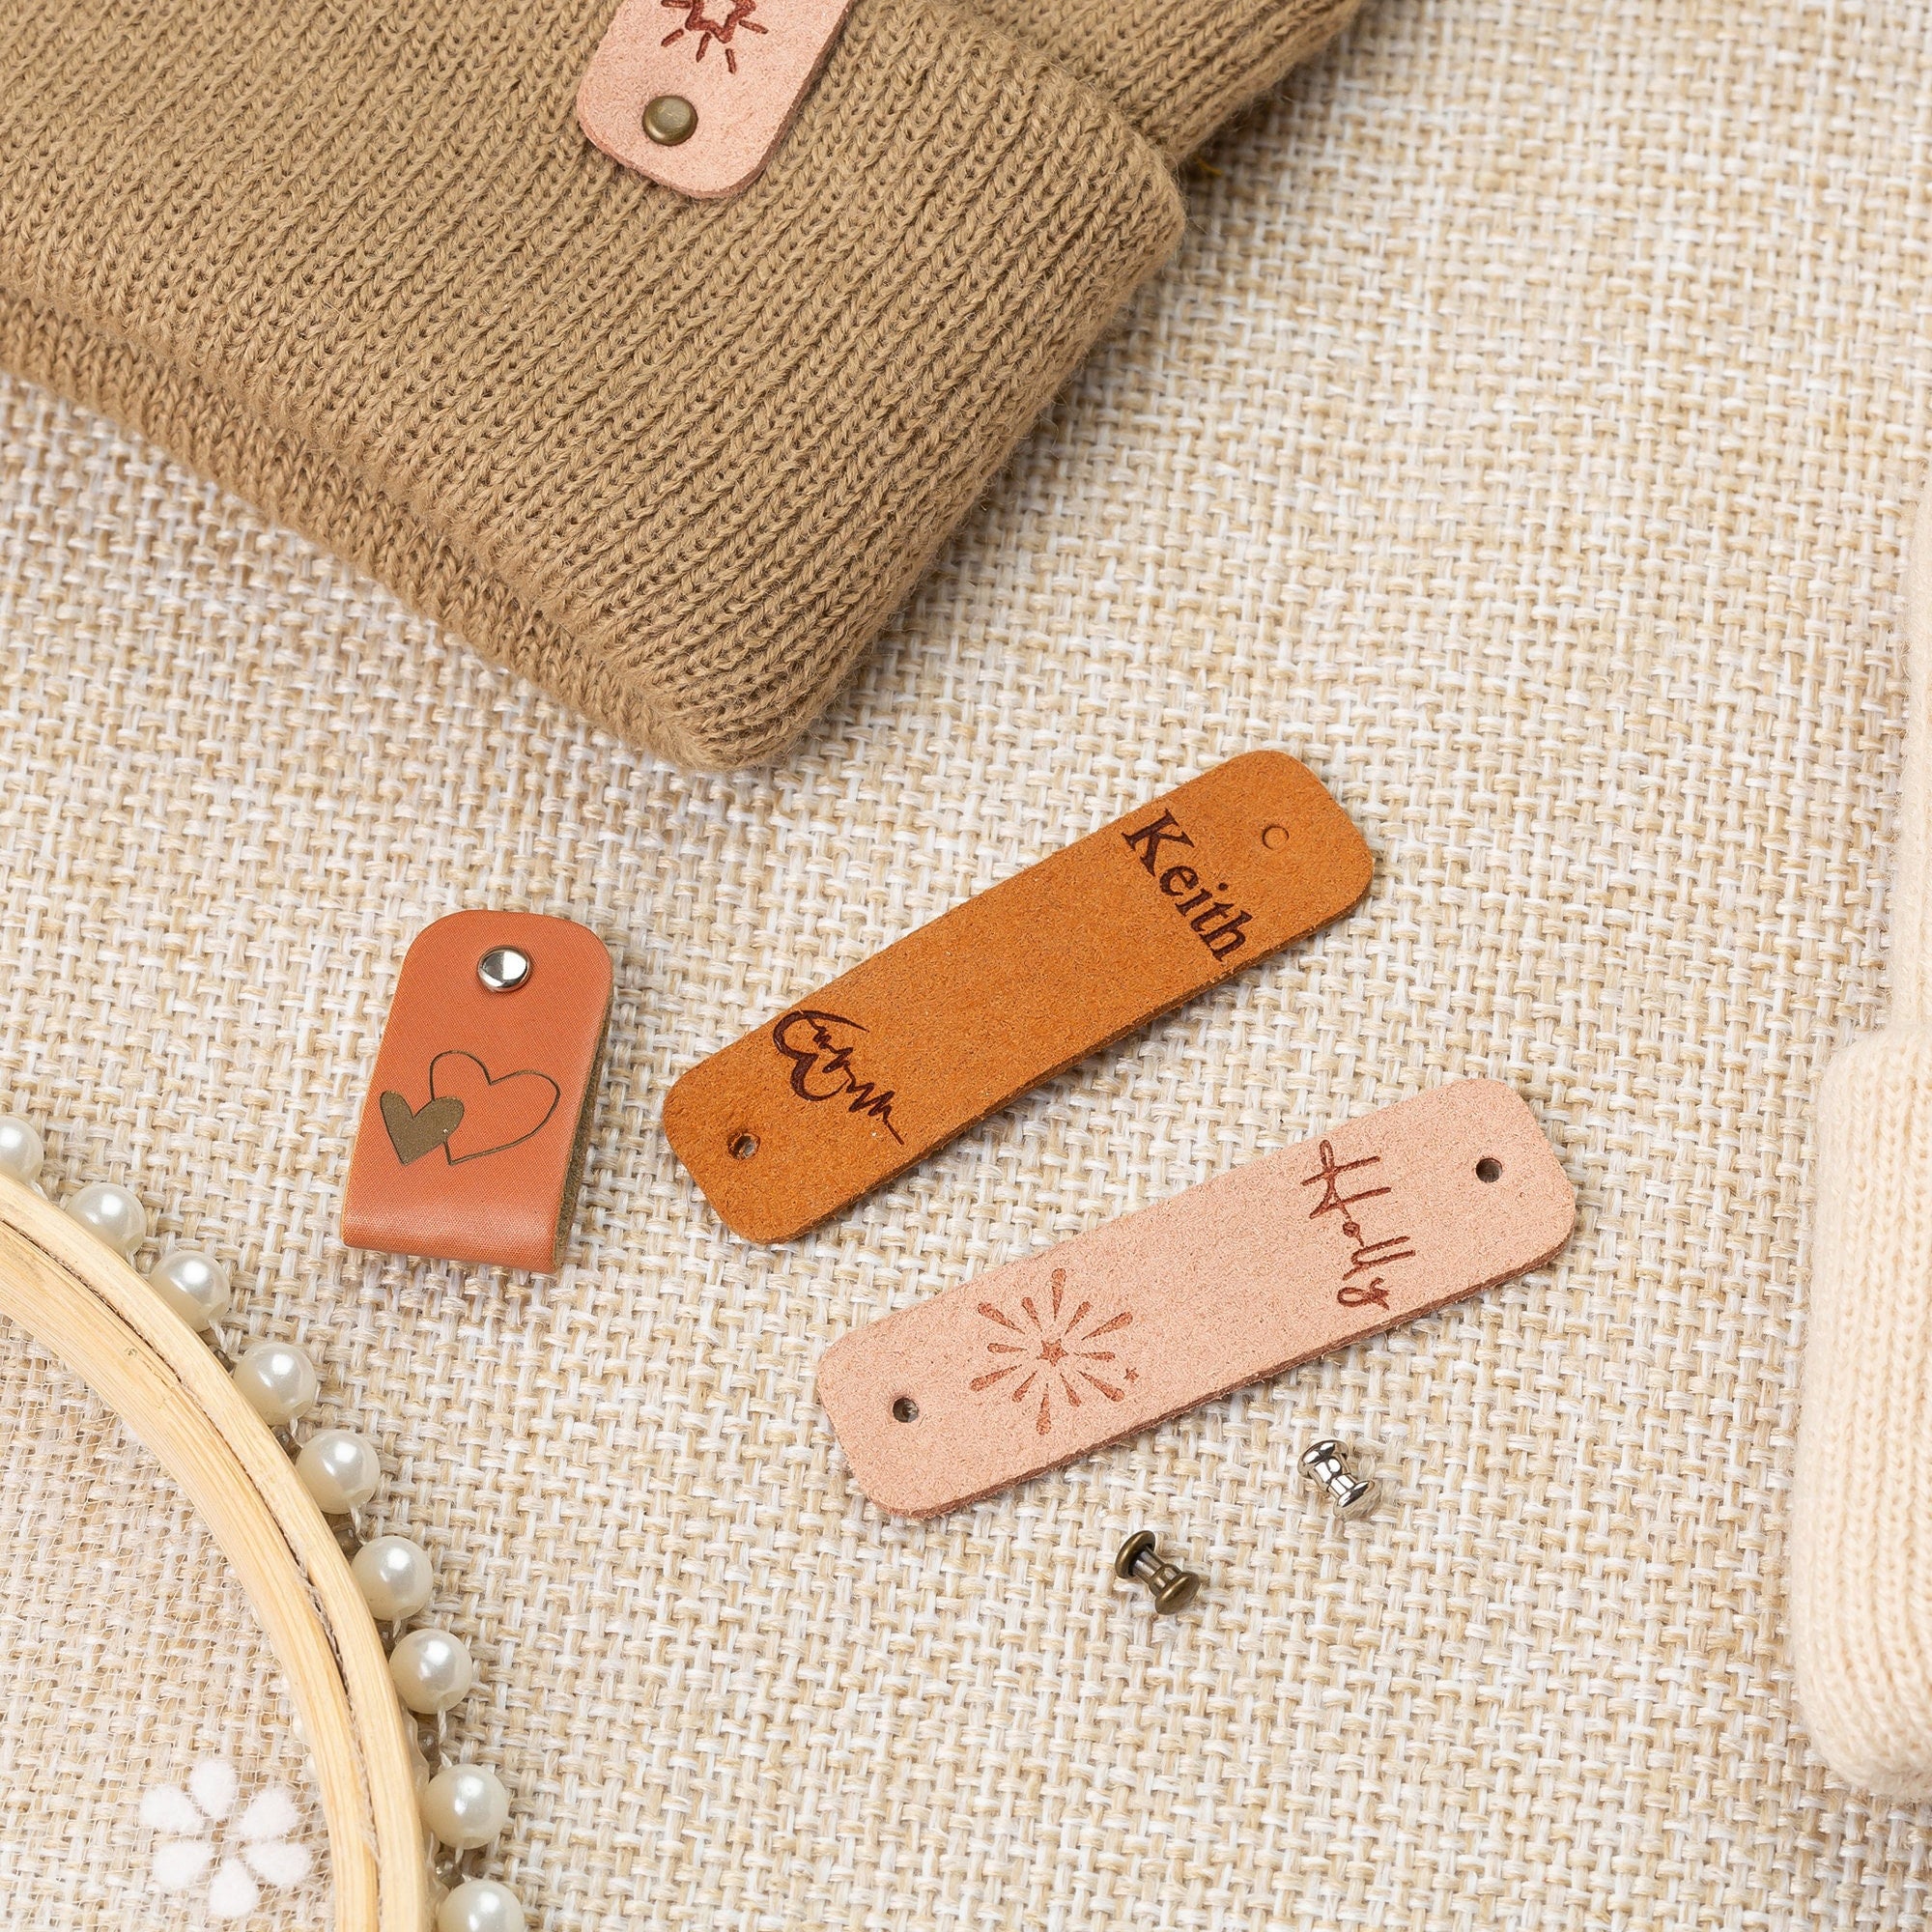 Custom Labels with Metal Rivet, Knitting Beanie Tags, Personalized Leather  Tags, Crochet Tags, Leather Label for Knitted items, Handmade Tag